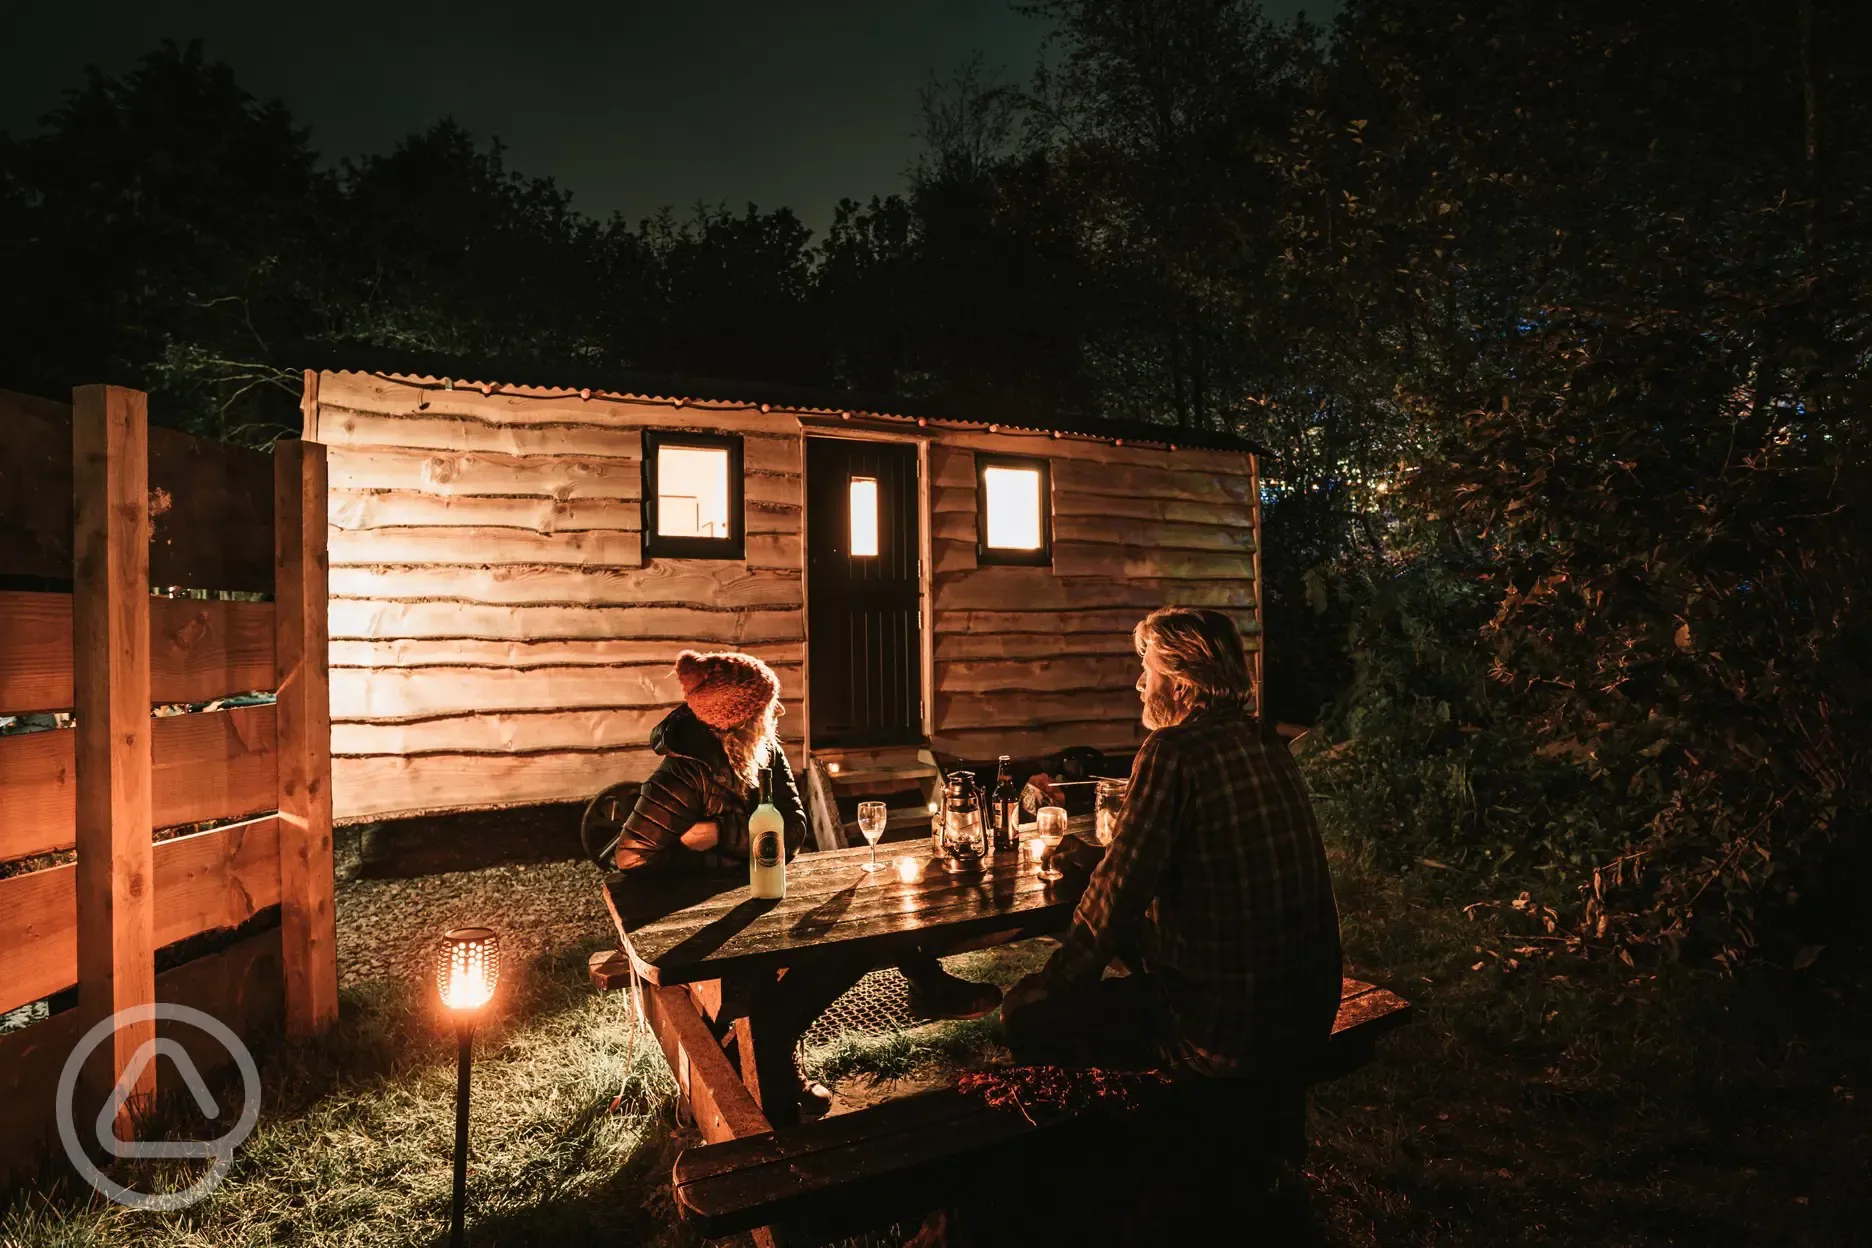 Enjoy star gazing round the fire outside the quarry wagons